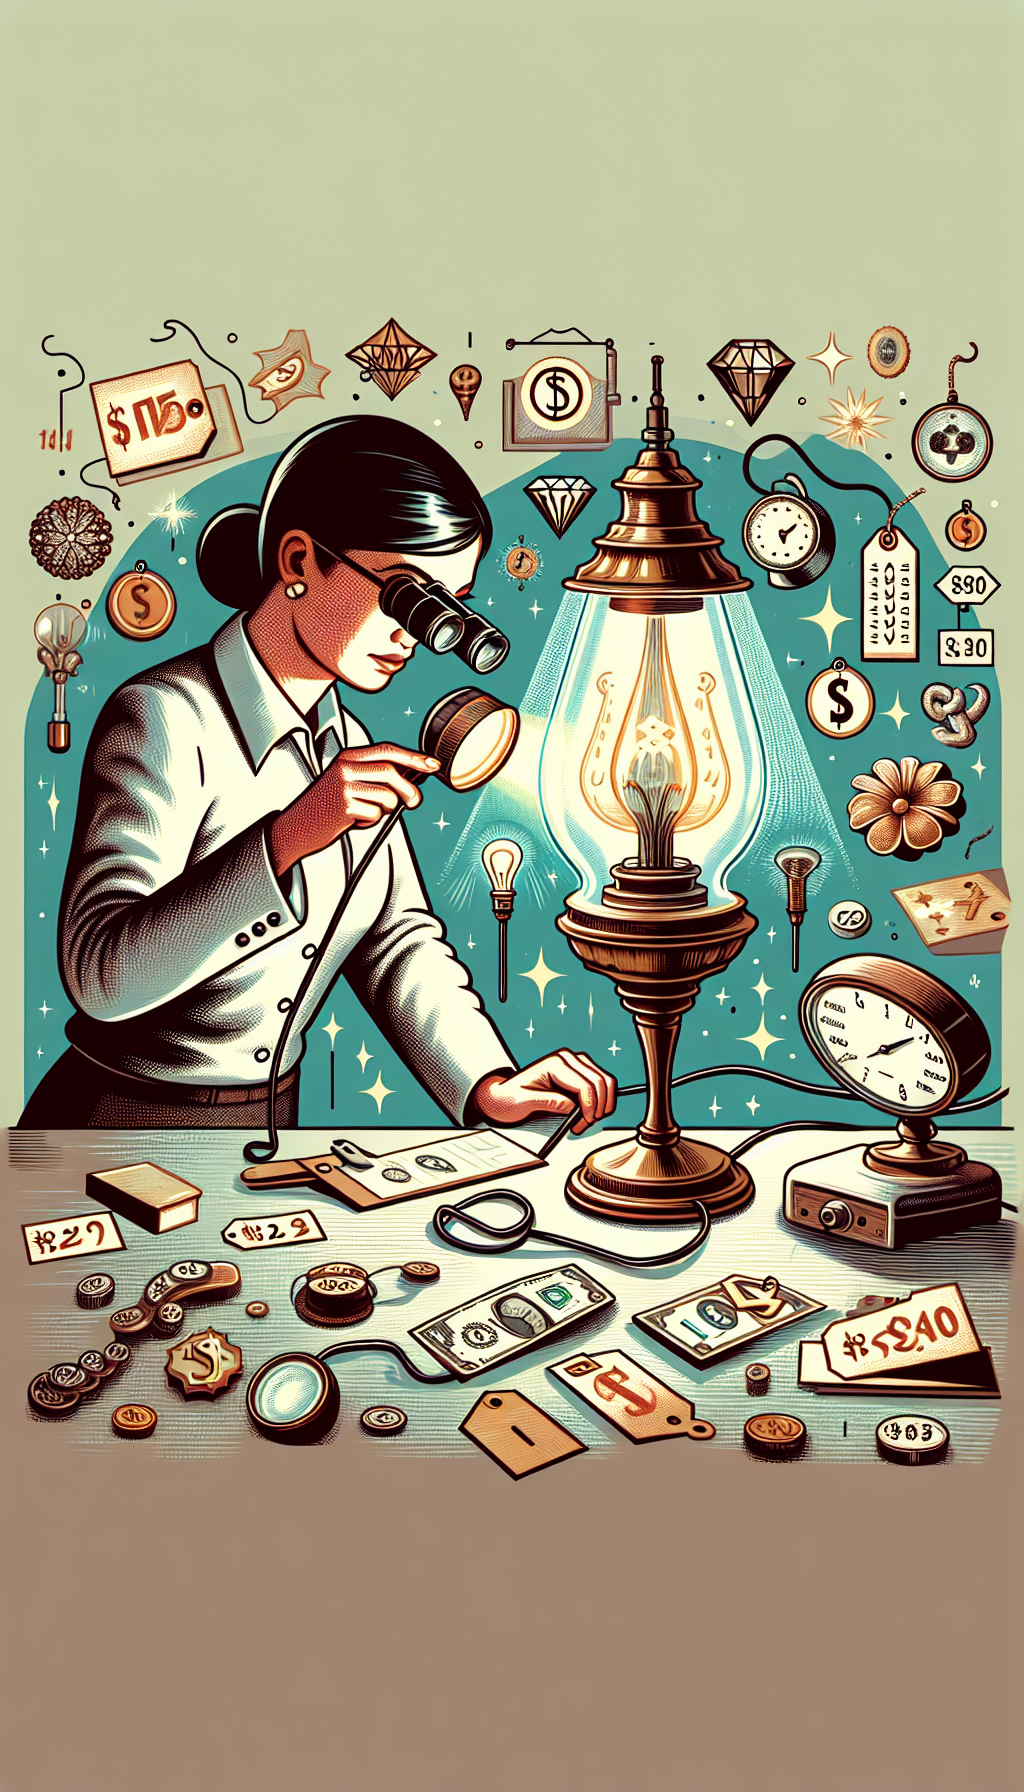 A vintage-styled illustration features an expert appraiser examining a glowing electric hurricane lamp with a jeweler's loupe, surrounded by smaller images of price tags, decade markers, and classic ornamental motifs, symbolizing the valuation process. The lamp's light projects whimsical shadows that shape monetary symbols, subtly indicating its hidden value.

16:10